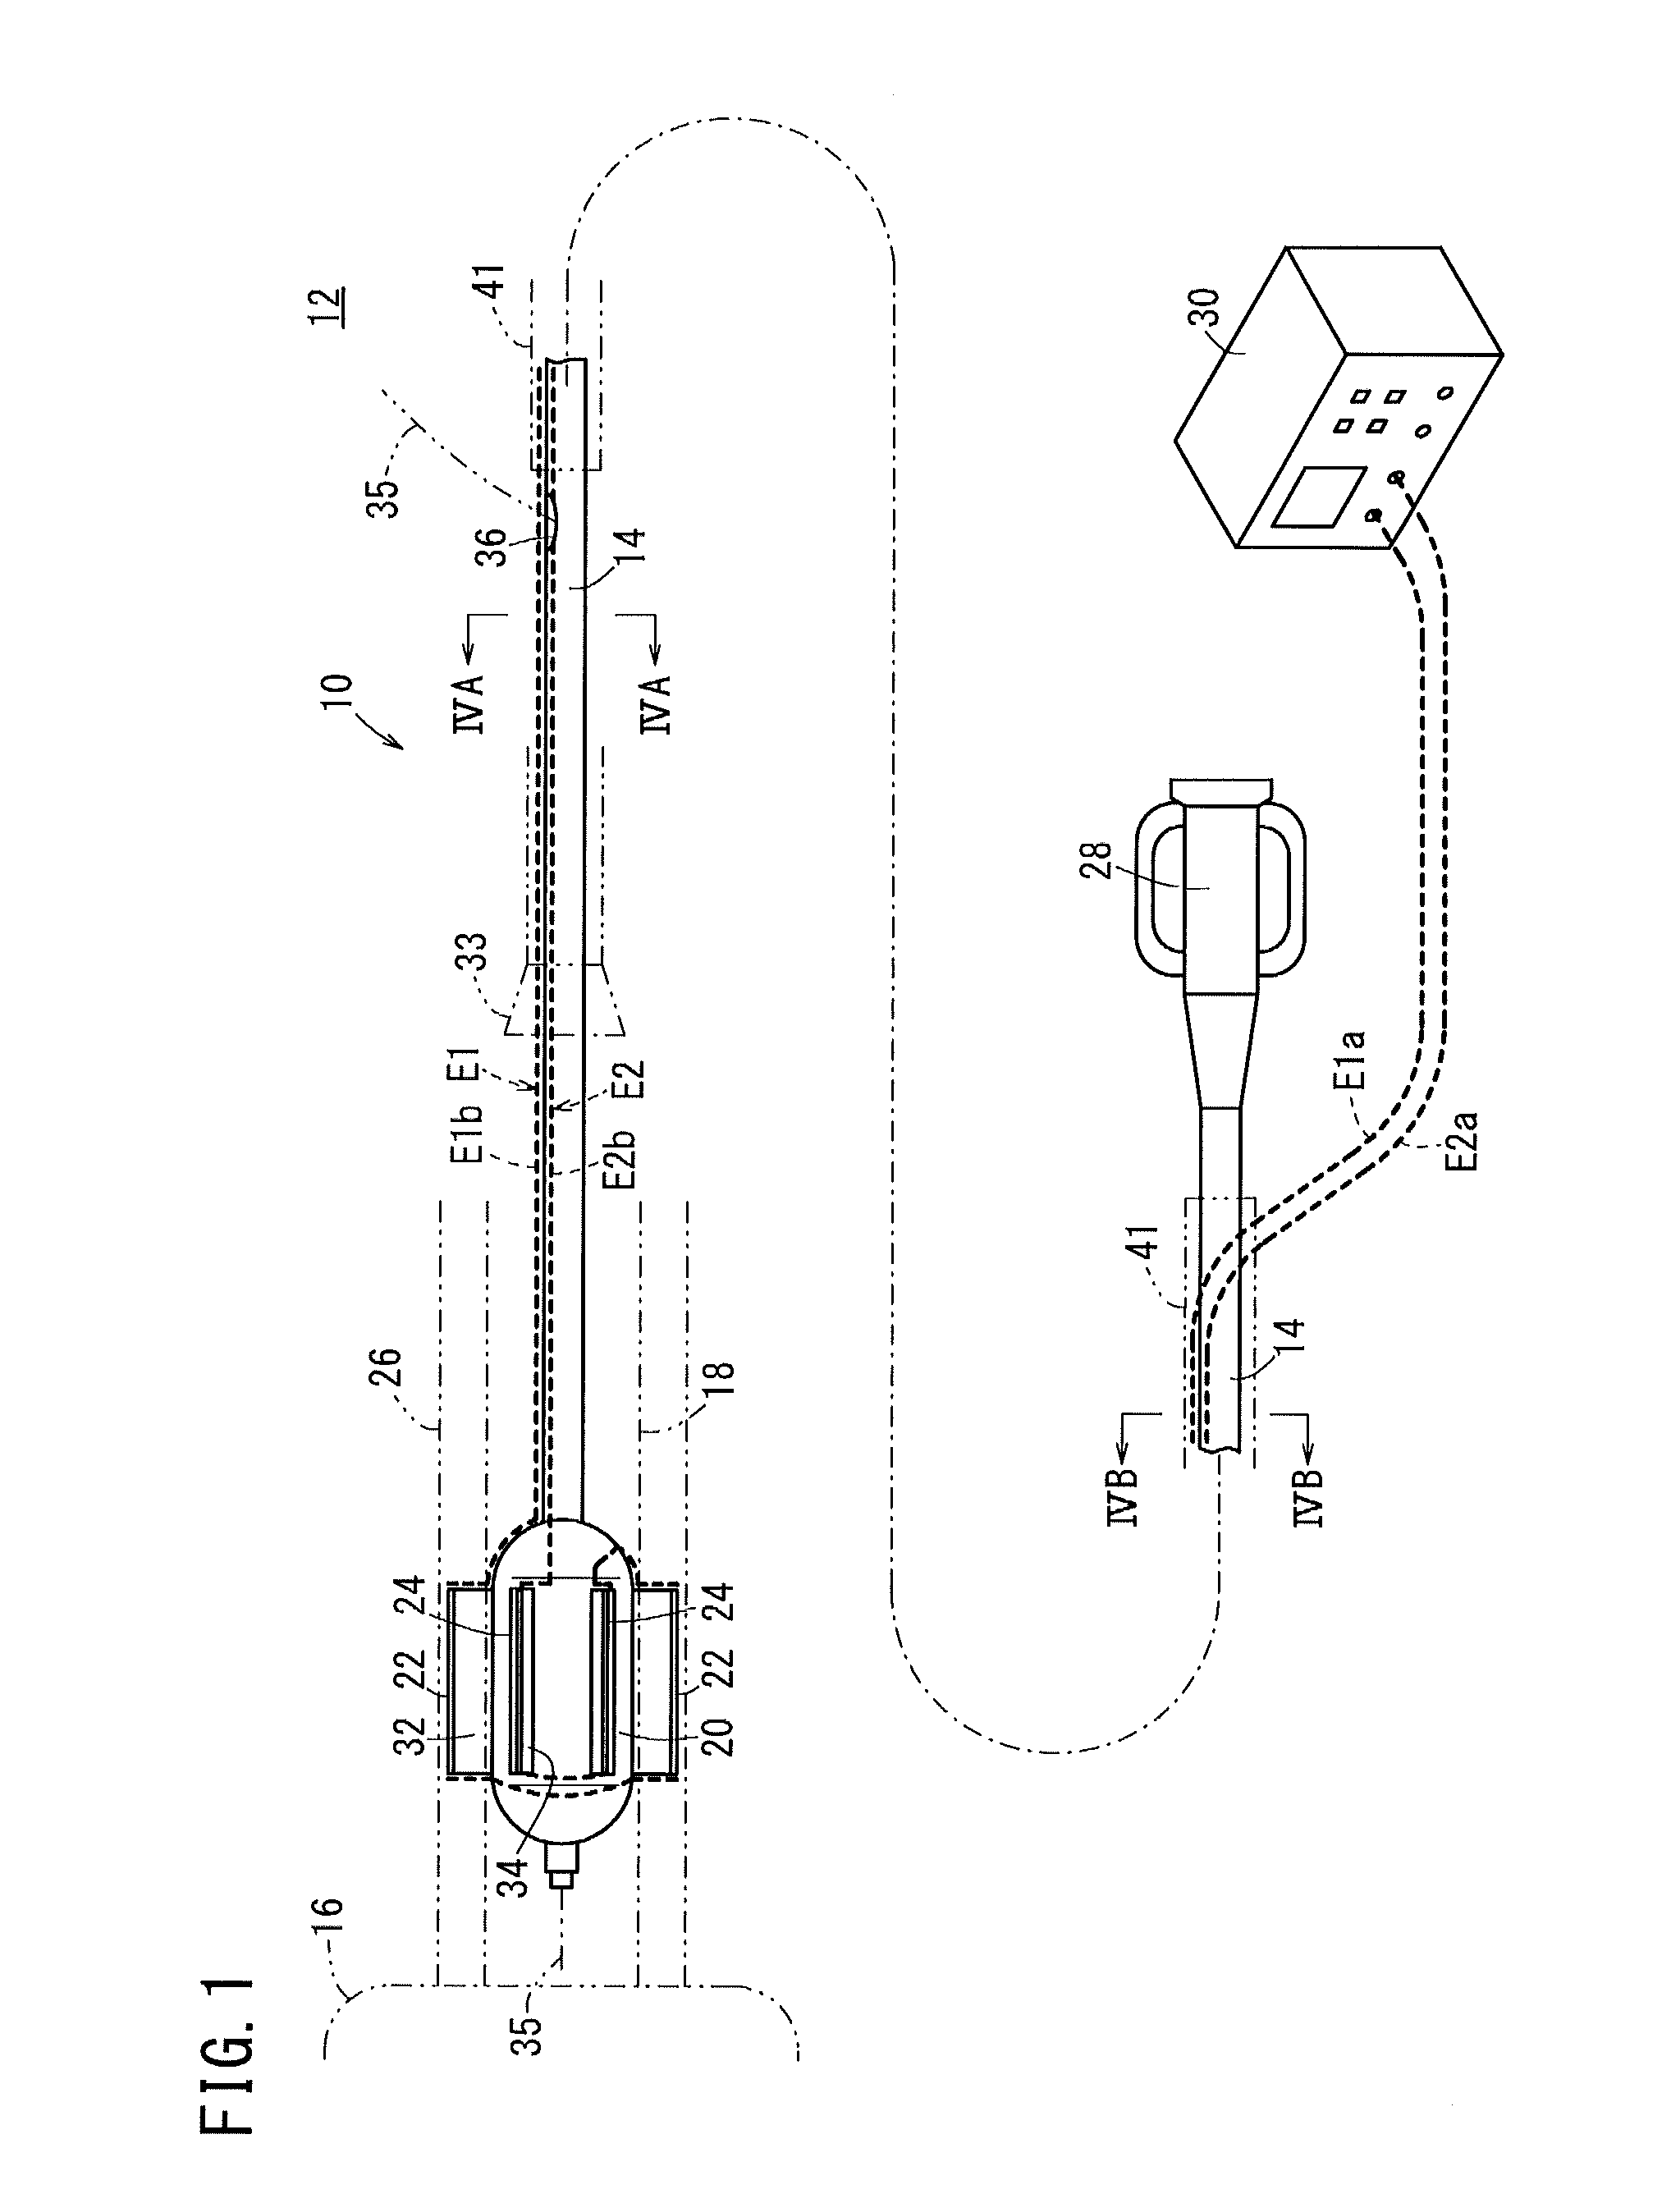 Balloon catheter and electrification system